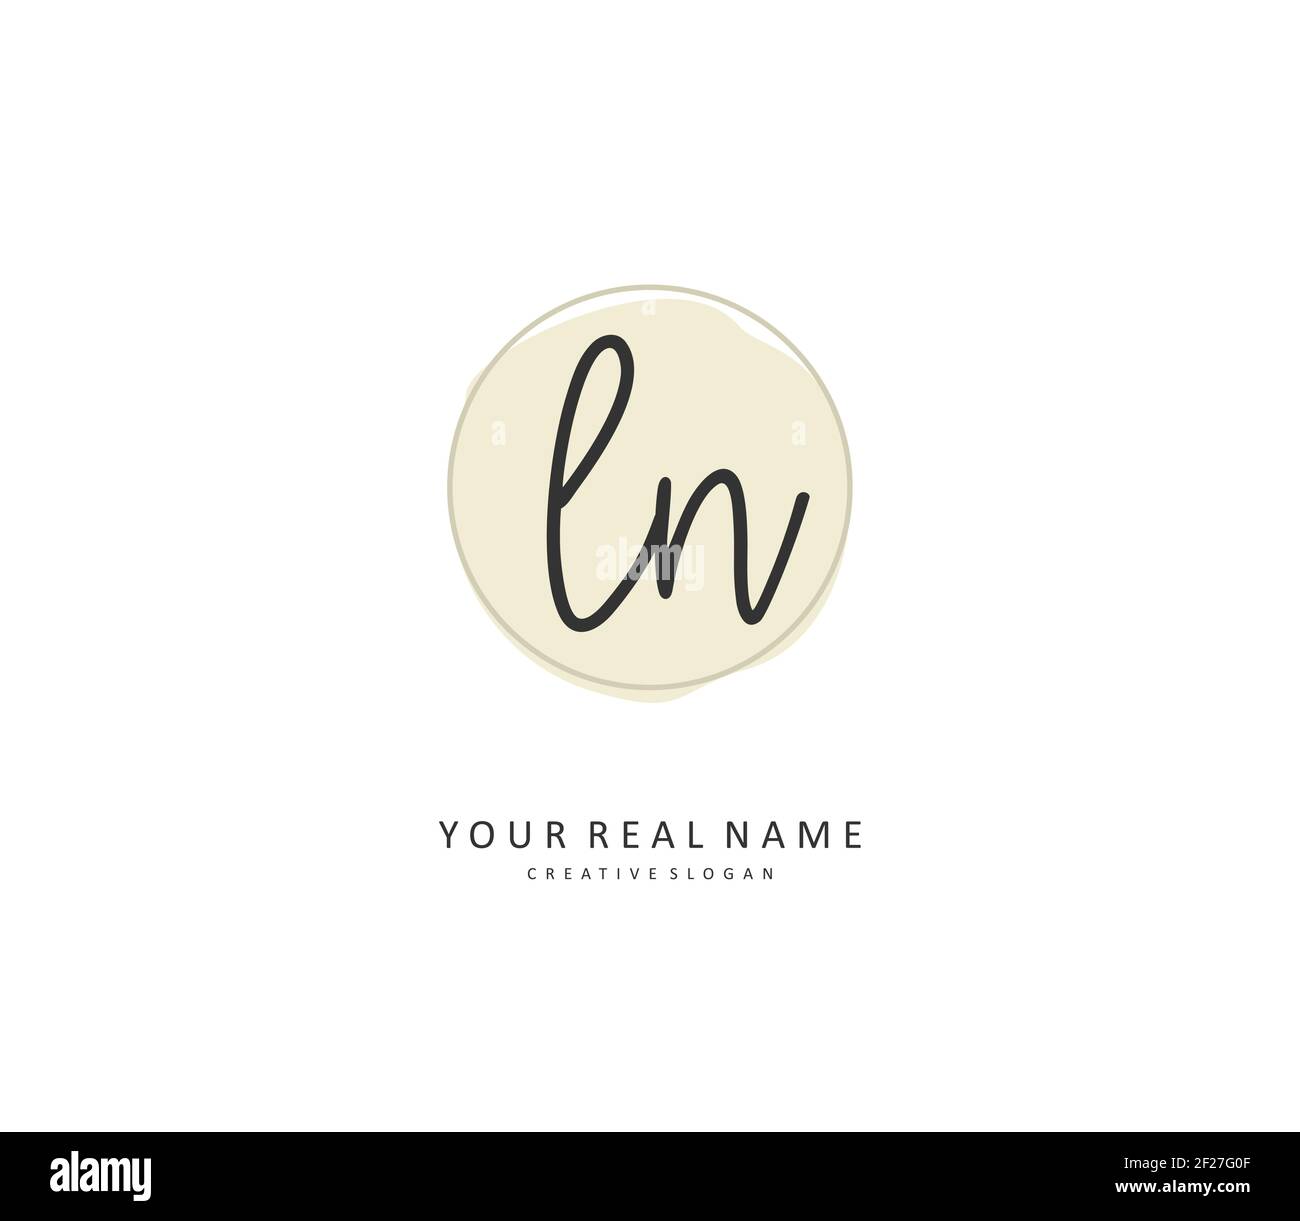 L N LN Initial letter handwriting and signature logo. A concept handwriting initial logo with template element. Stock Vector